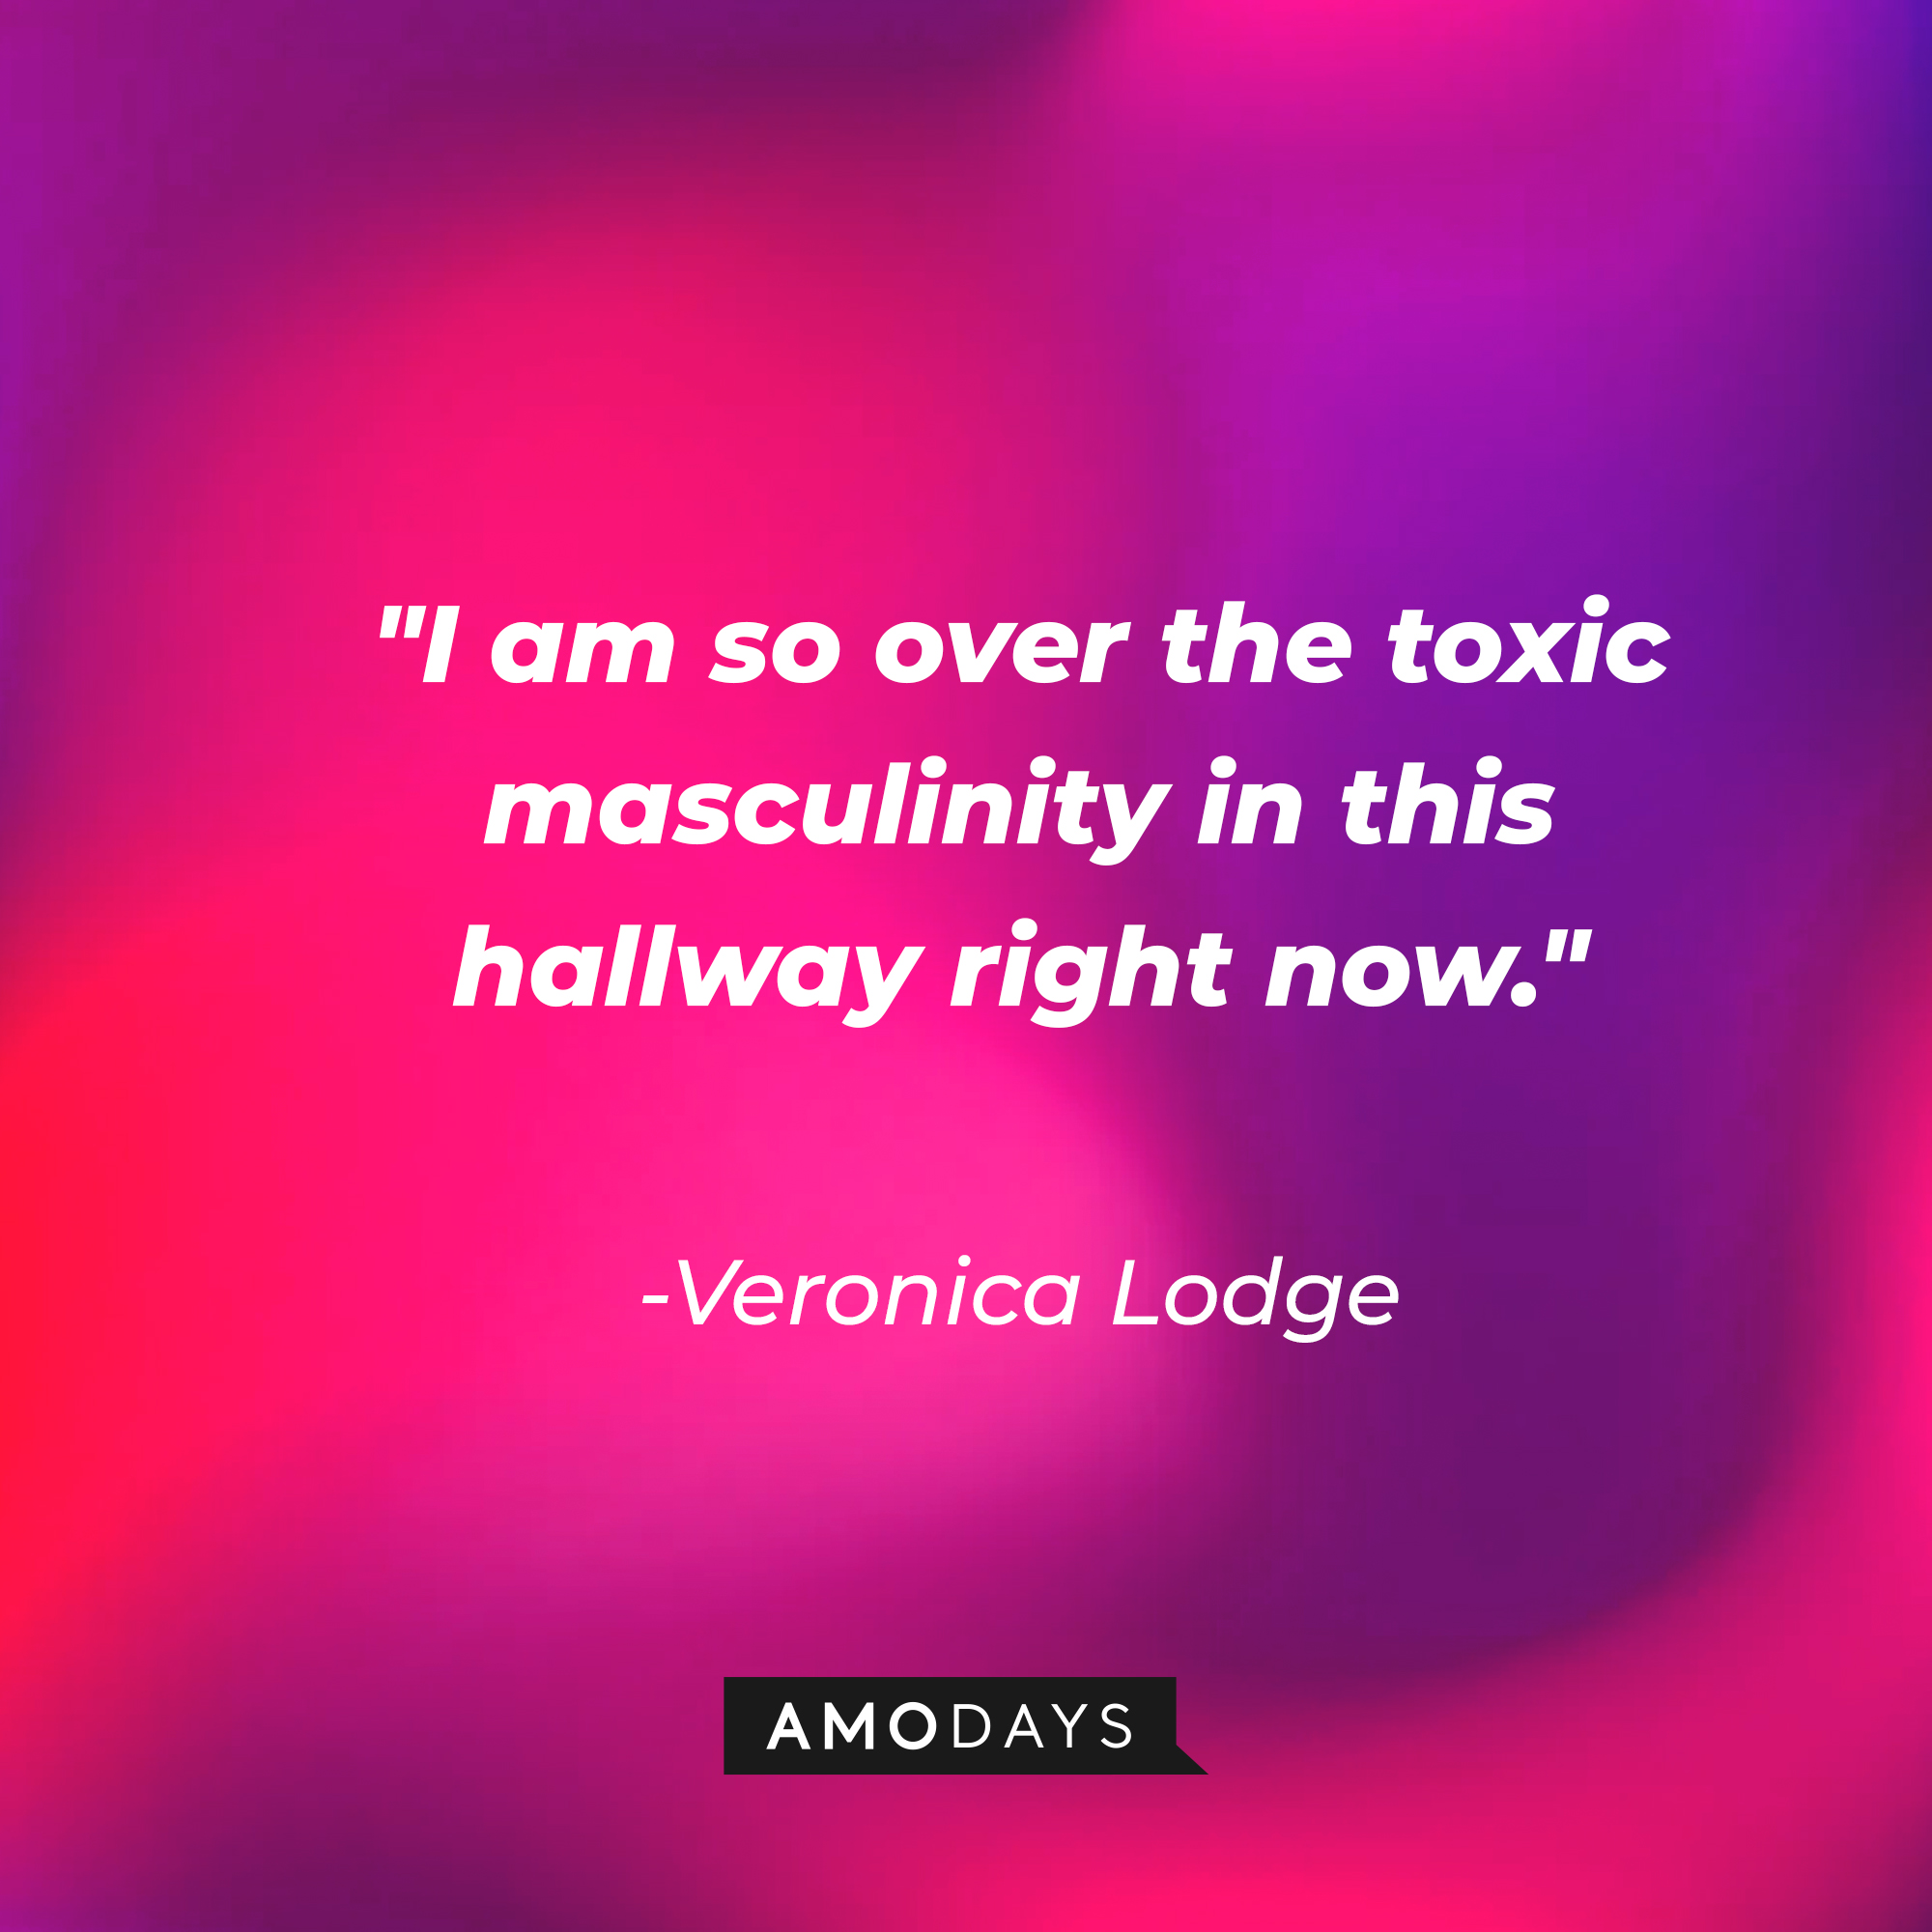 Veronica Lodge's quote: "I am so over the toxic masculinity in this hallway right now." | Source: AmoDays